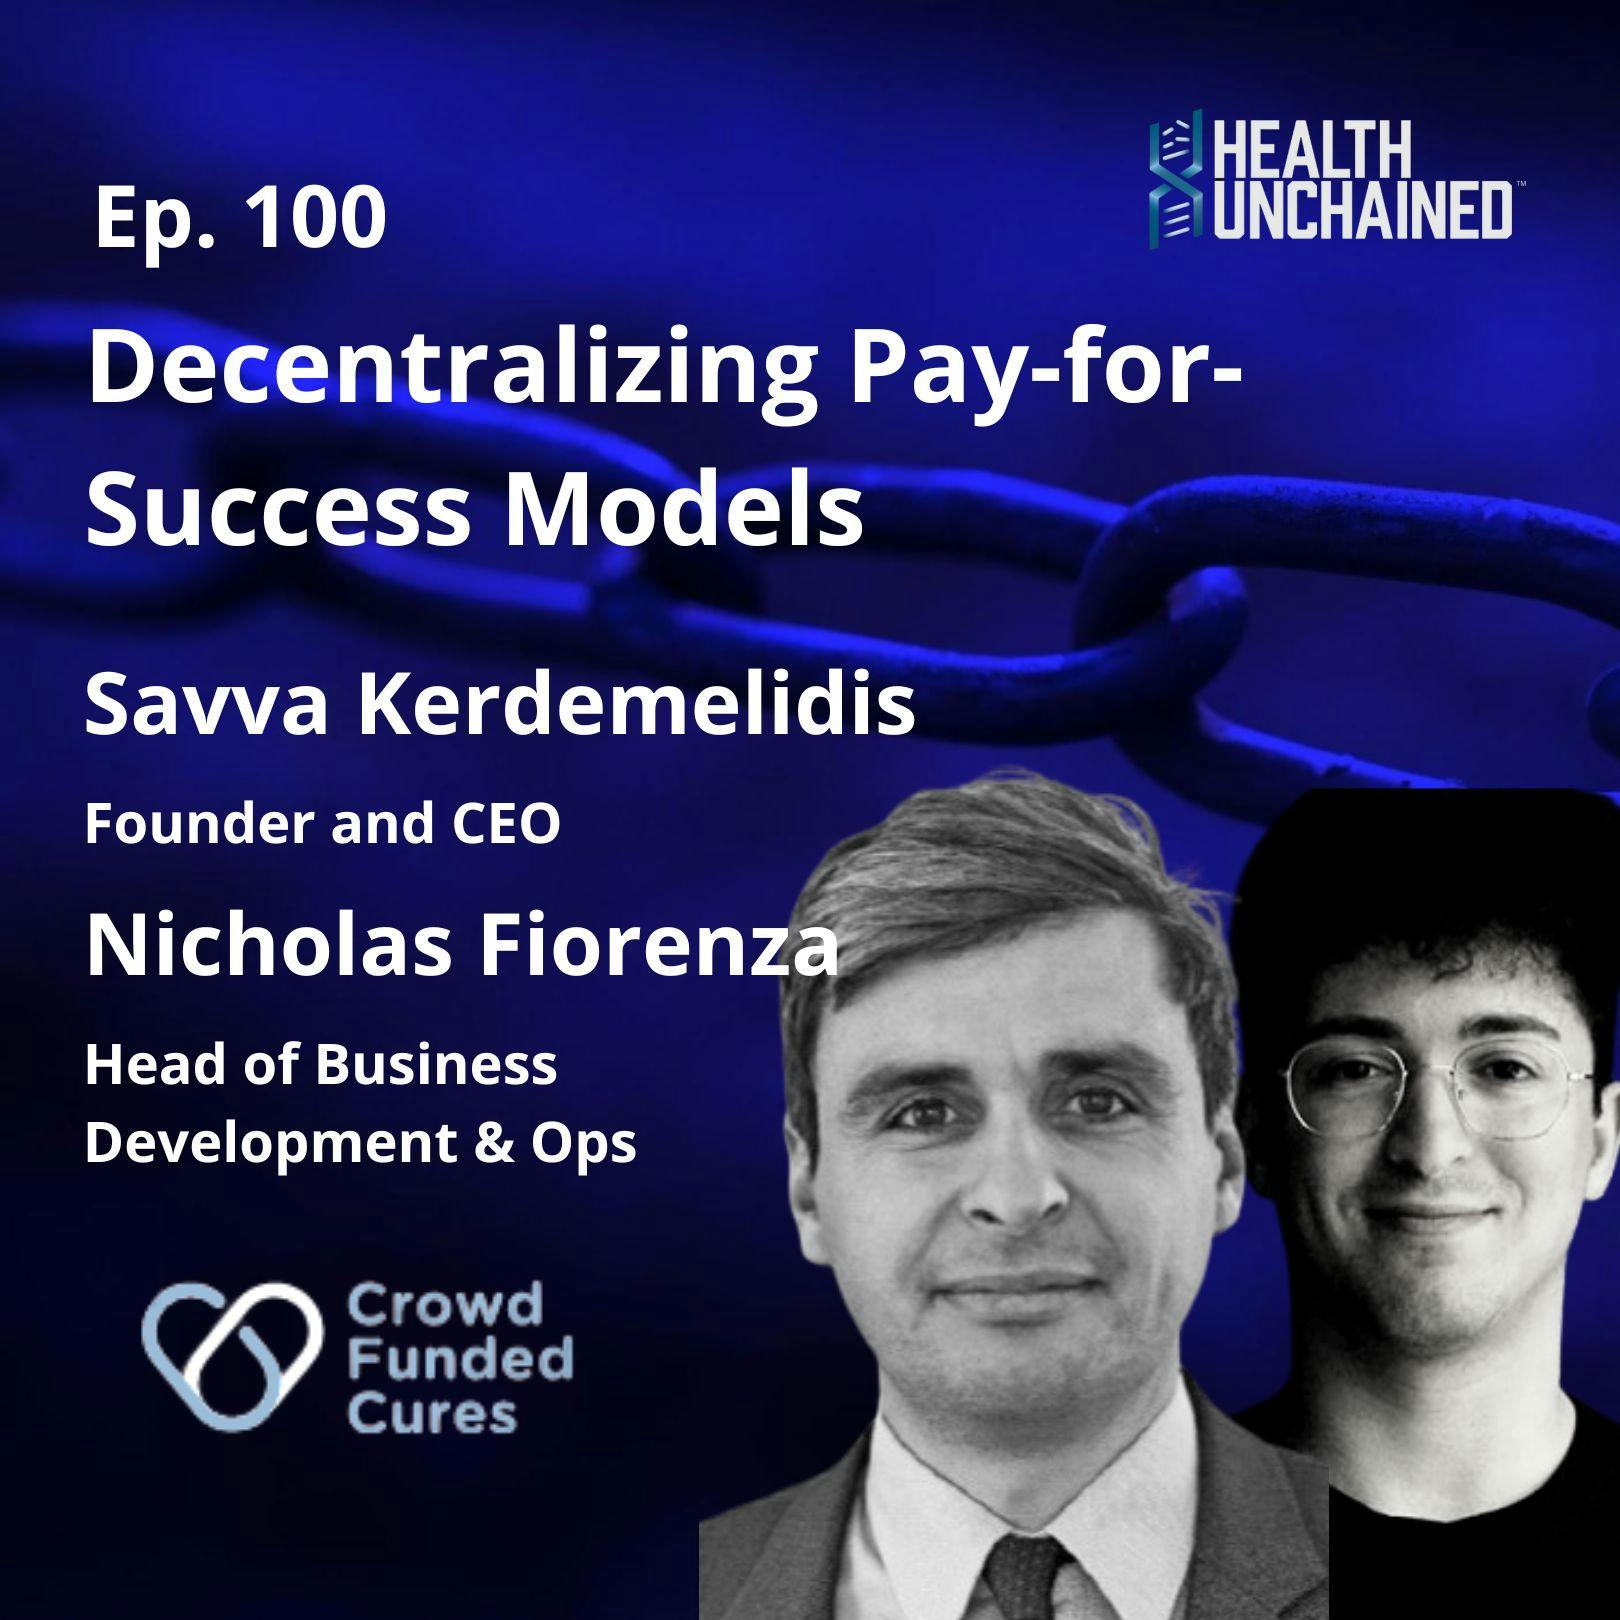 Ep. 100: Decentralizing Pay-for-Success Models - Savva Kerdemelidis and Nicholas Fiorenza (Crowd Funded Cures)